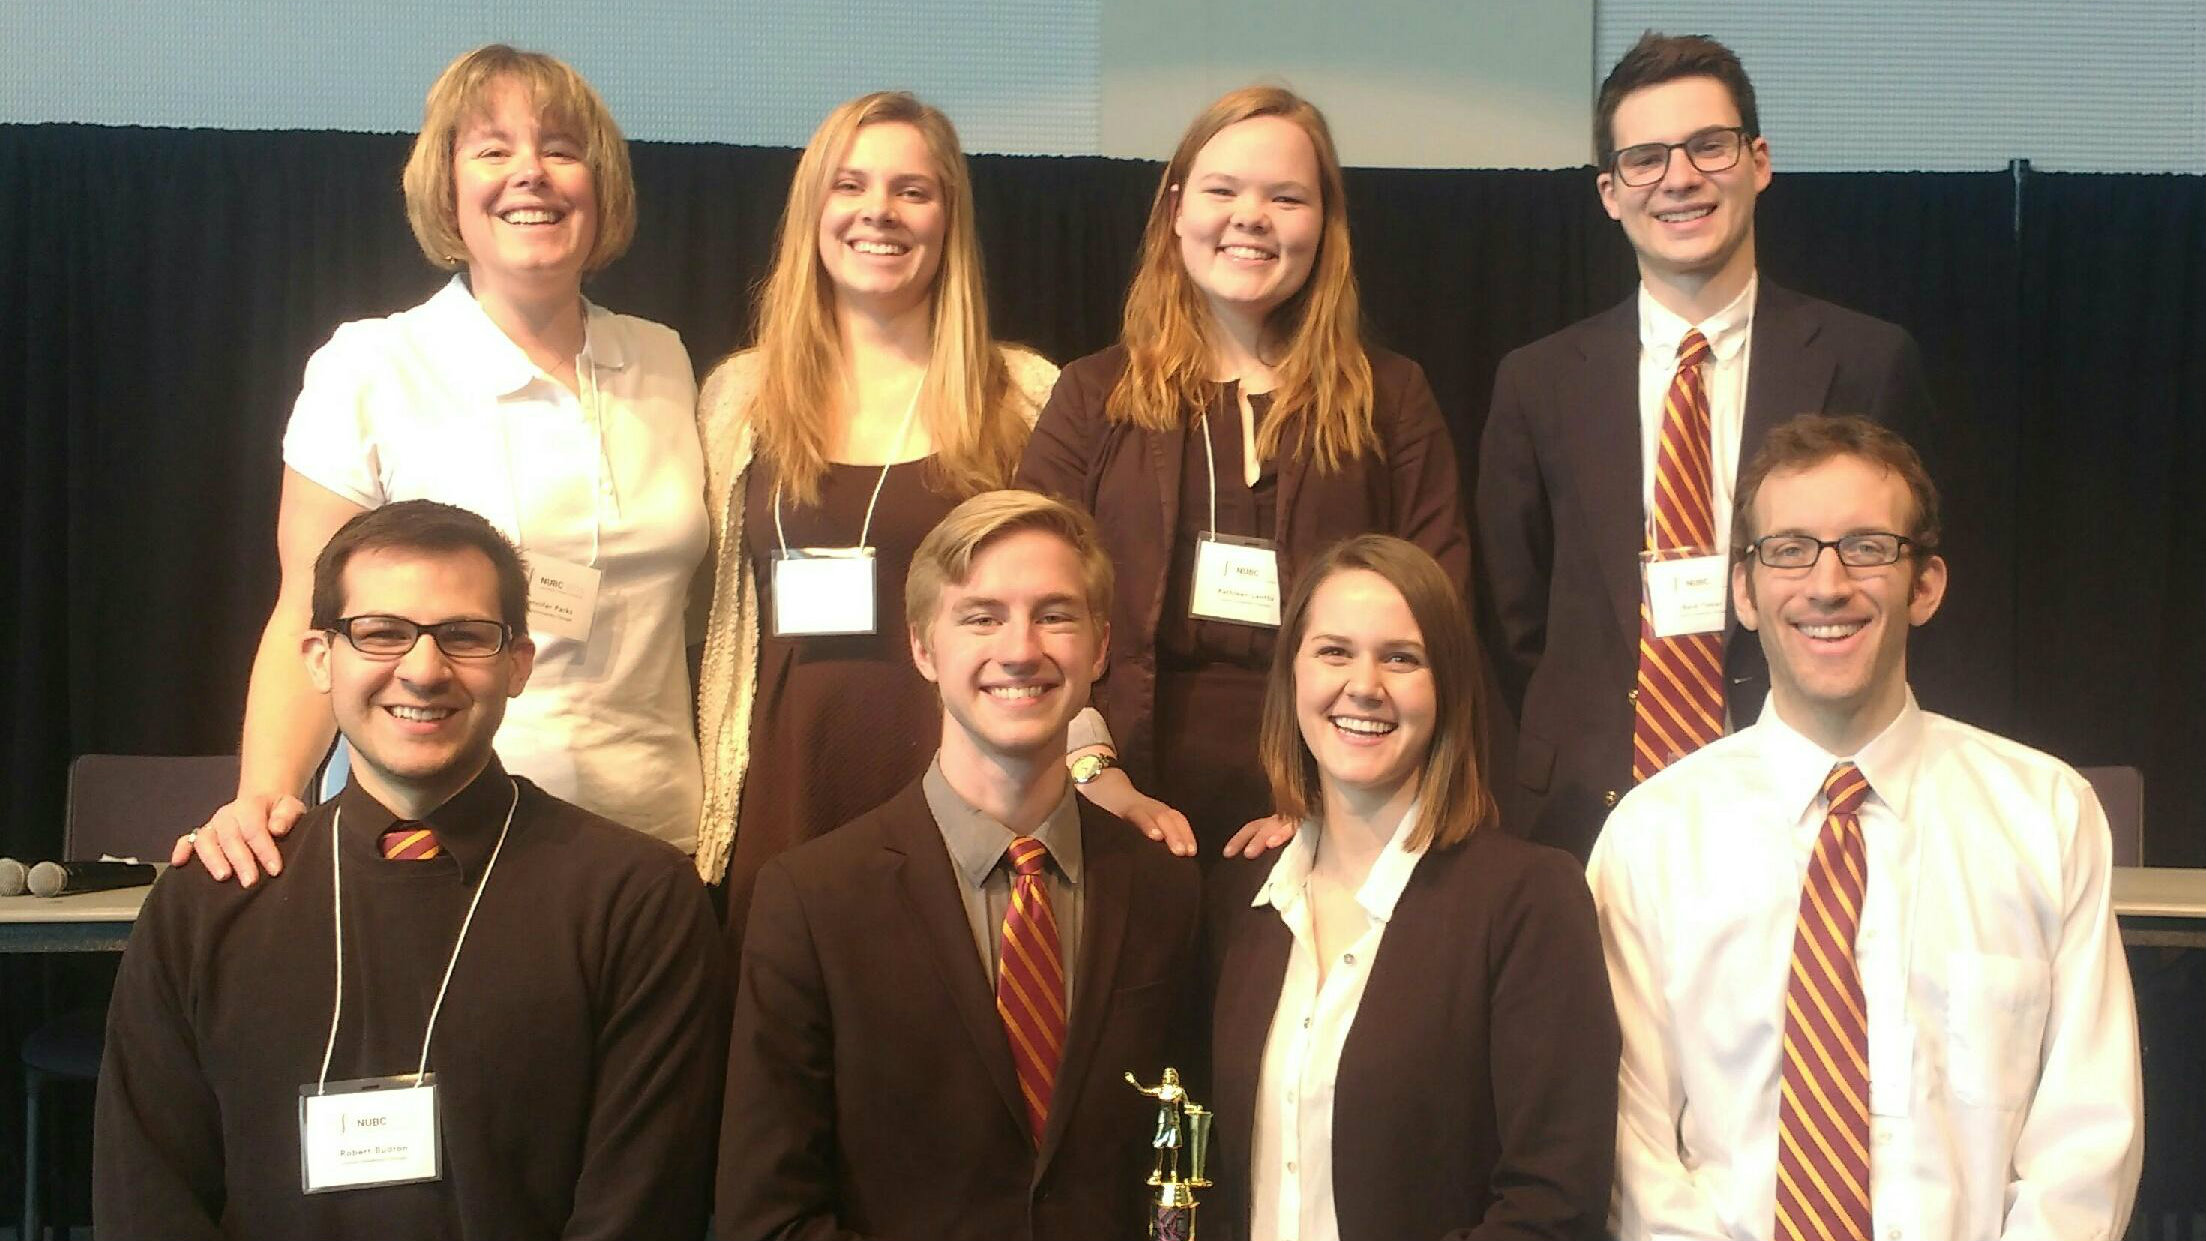 Bioethics Bowl Team Wins Second National Title at 2016 Competition